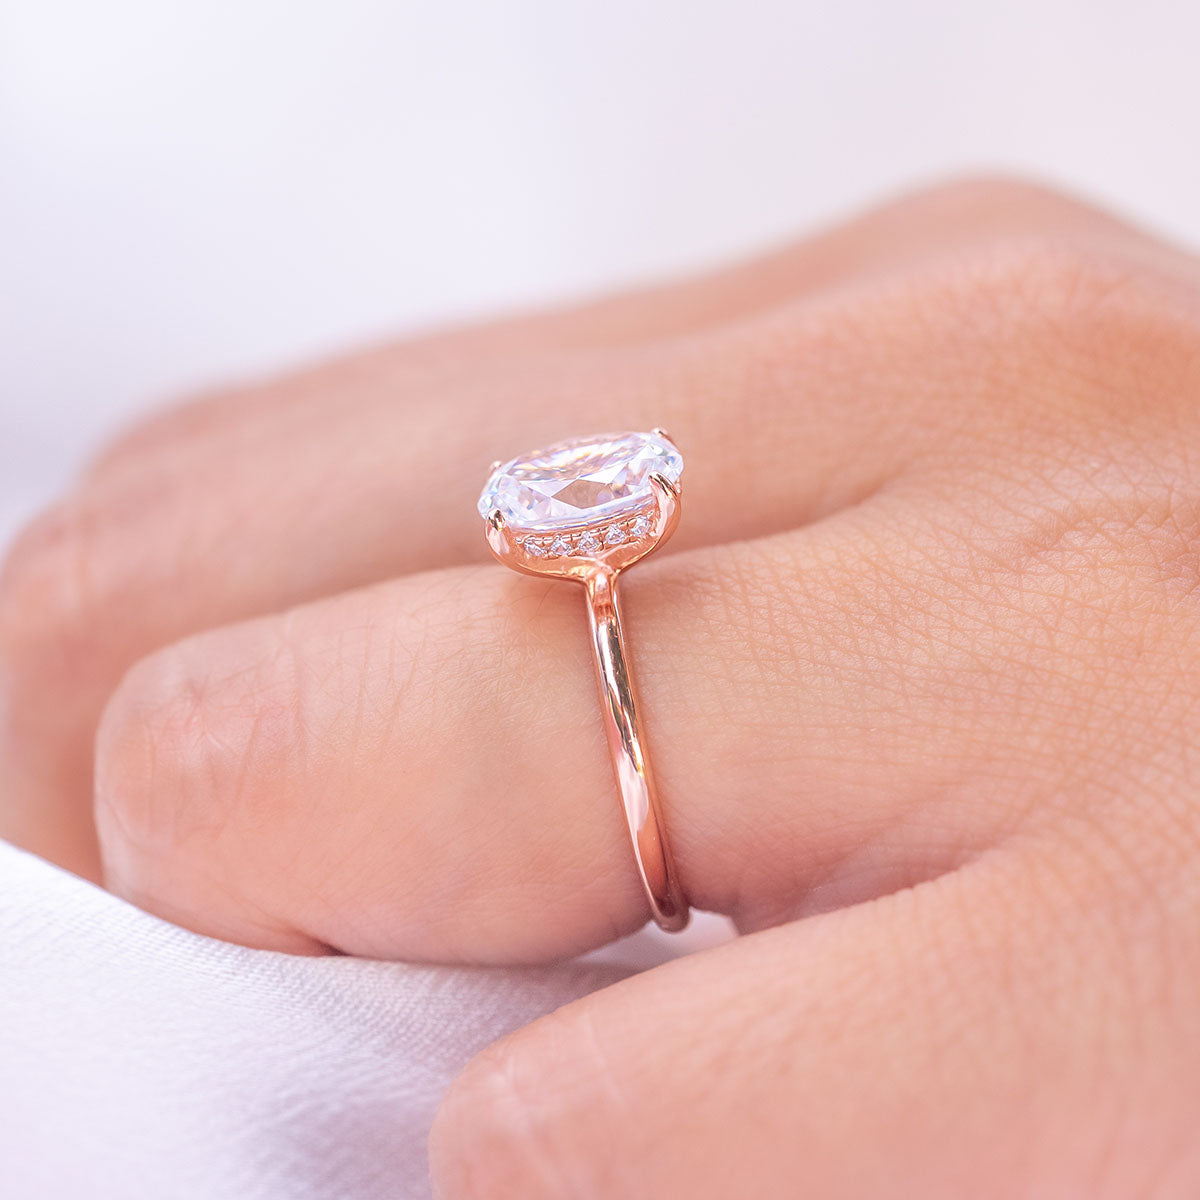 Rose gold round cut engagement ring with hidden halo